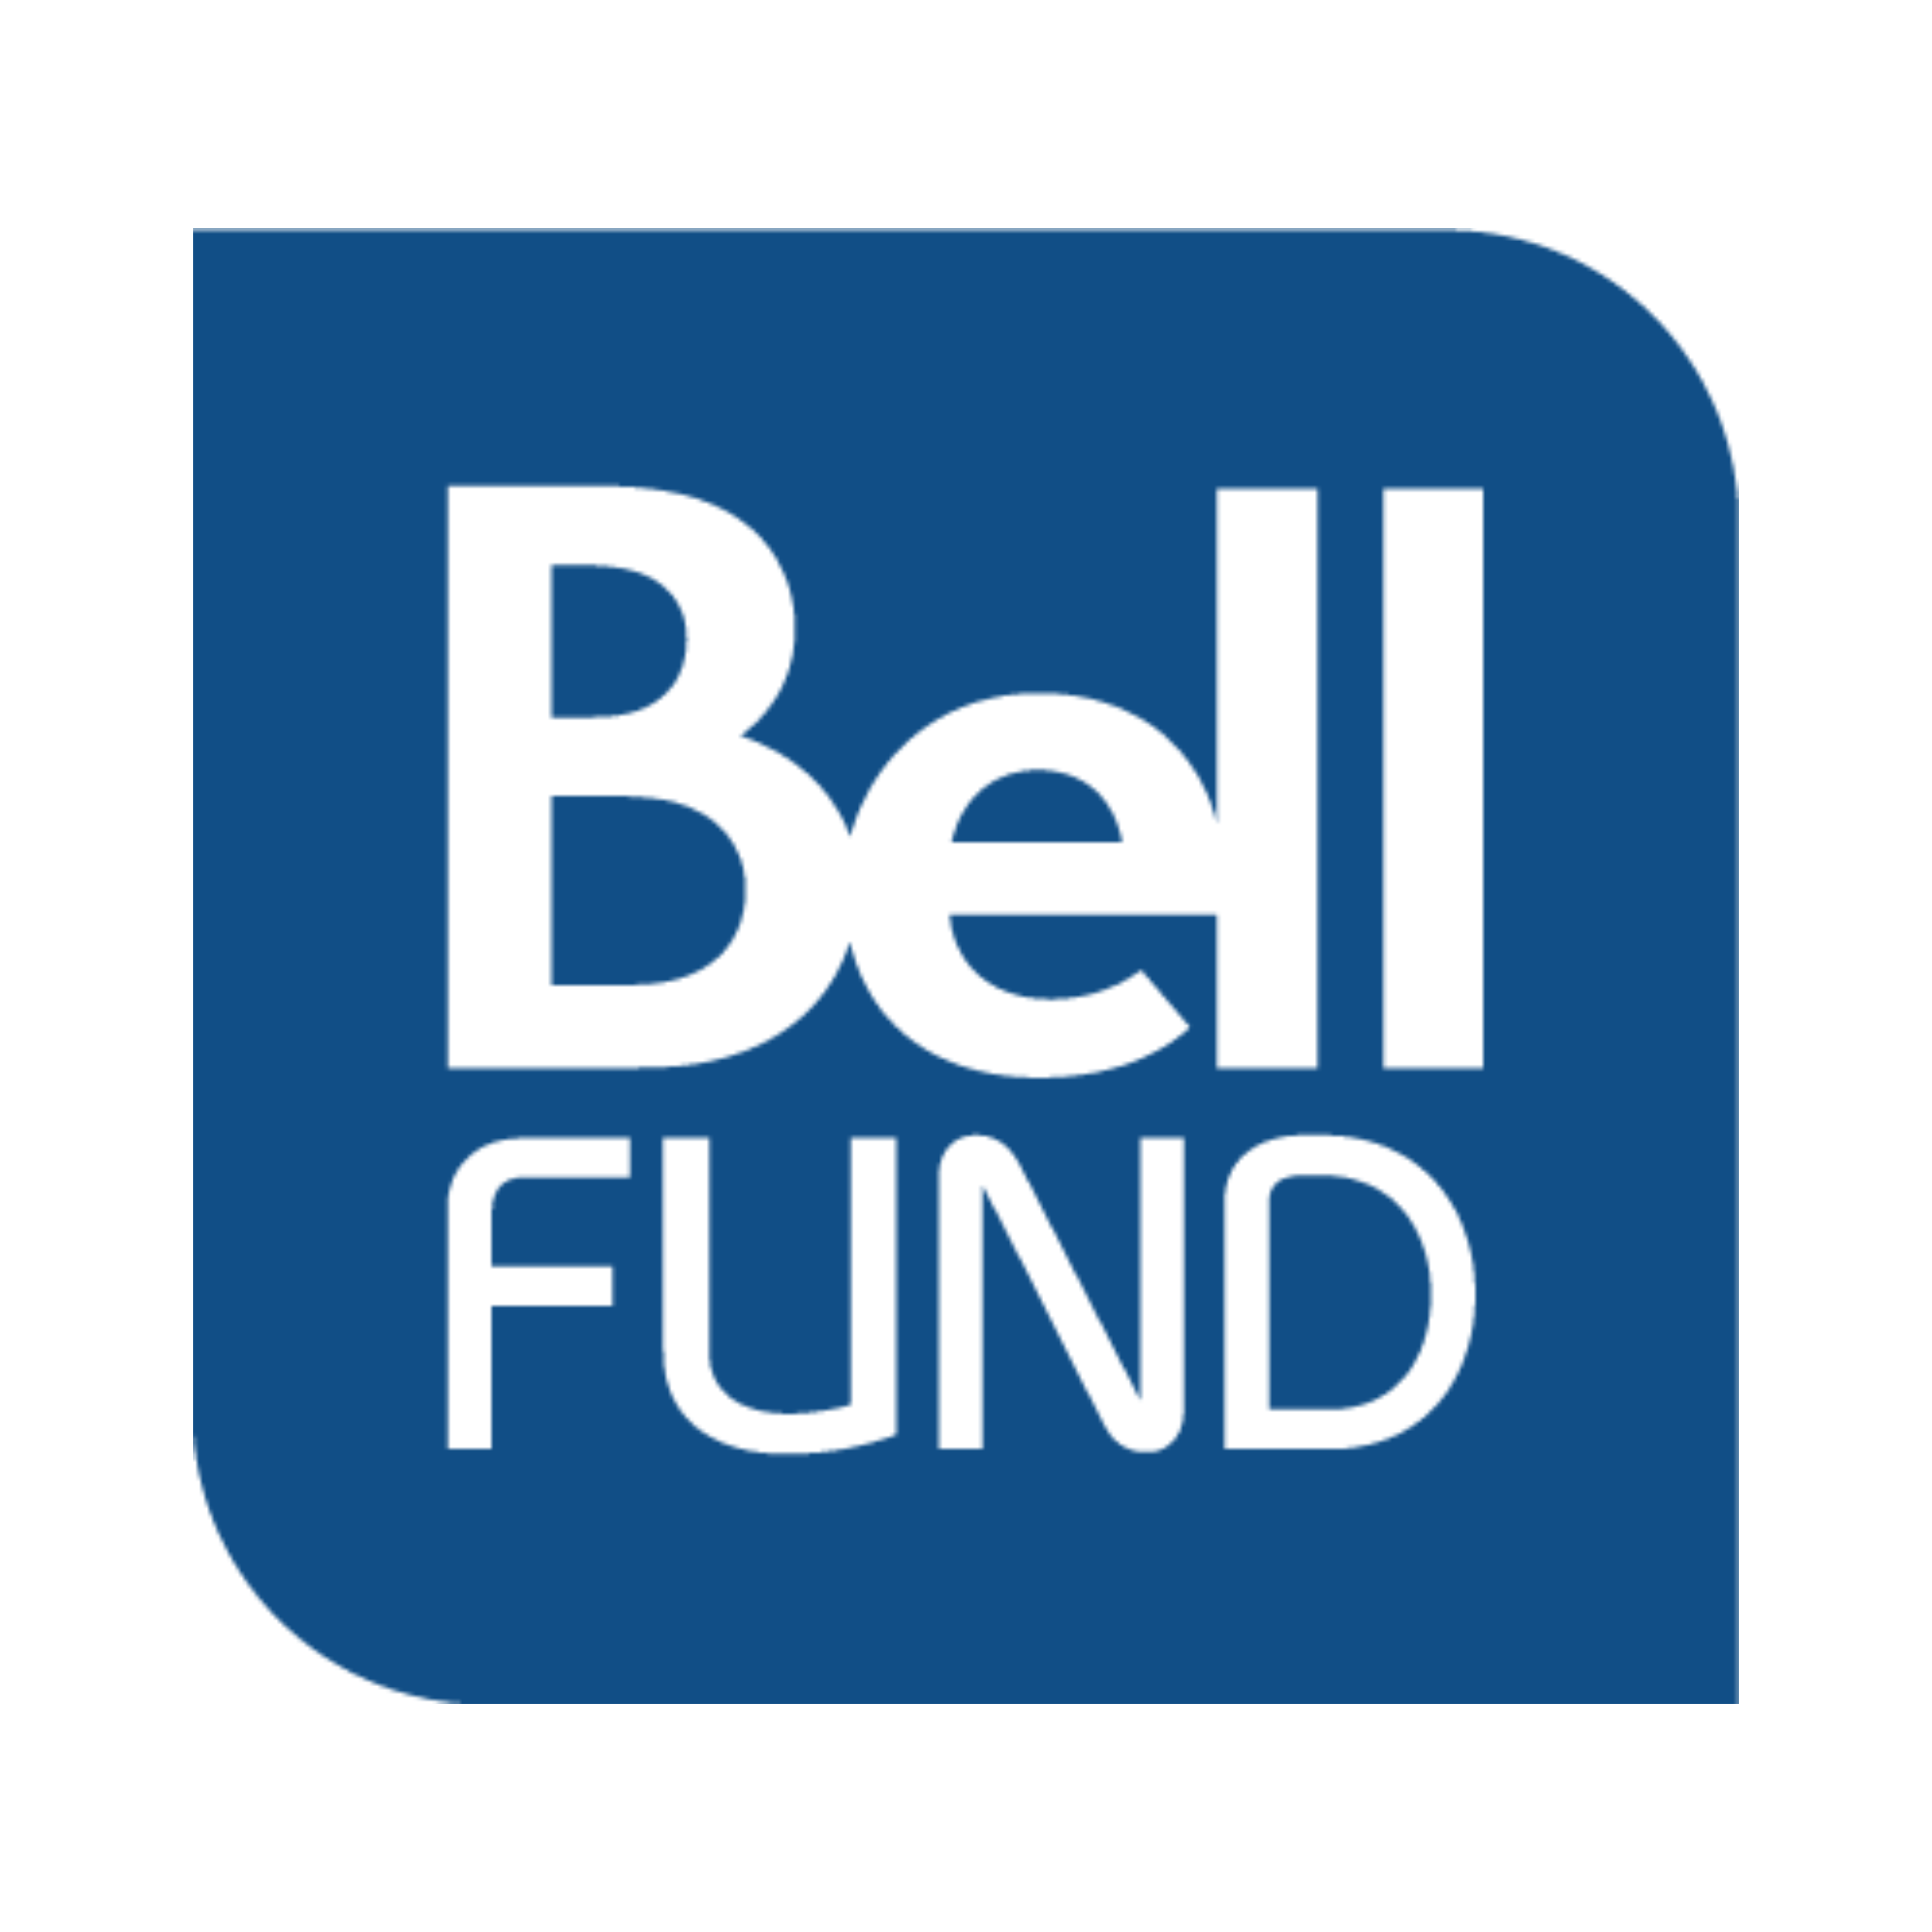 Bell Fund square logo.png